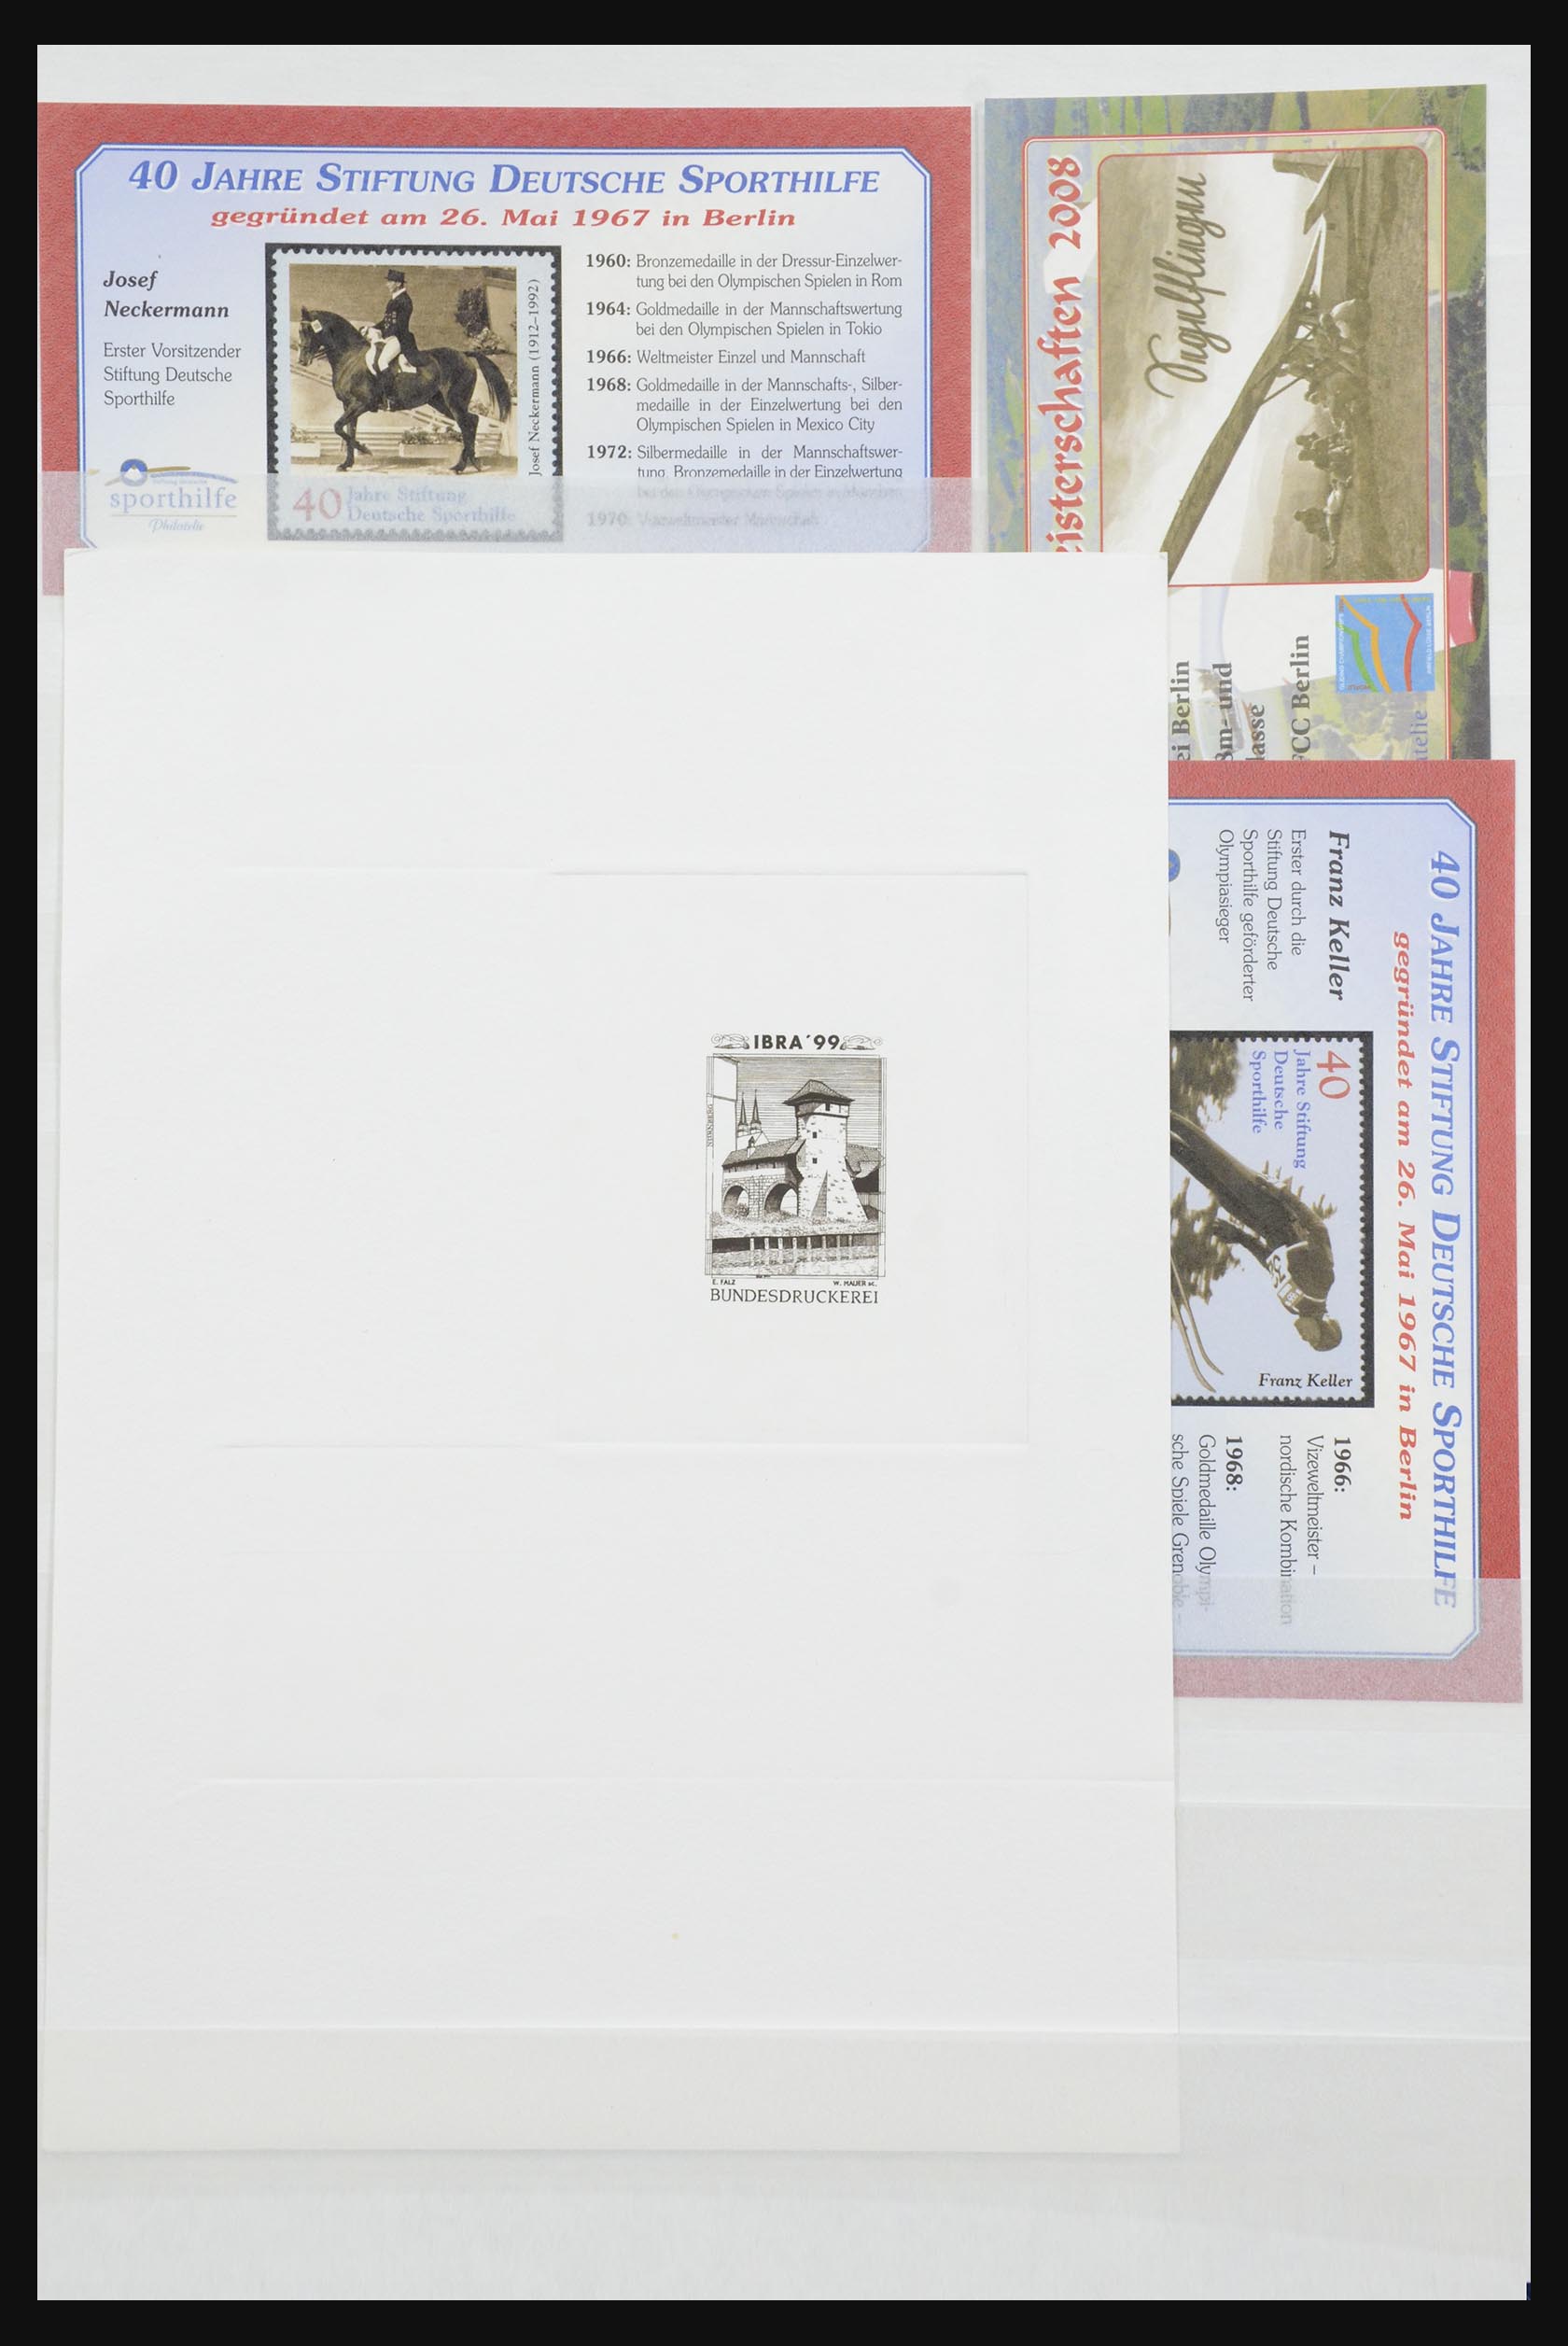 32050 029 - 32050 Bundespost special sheets 1980-2010.